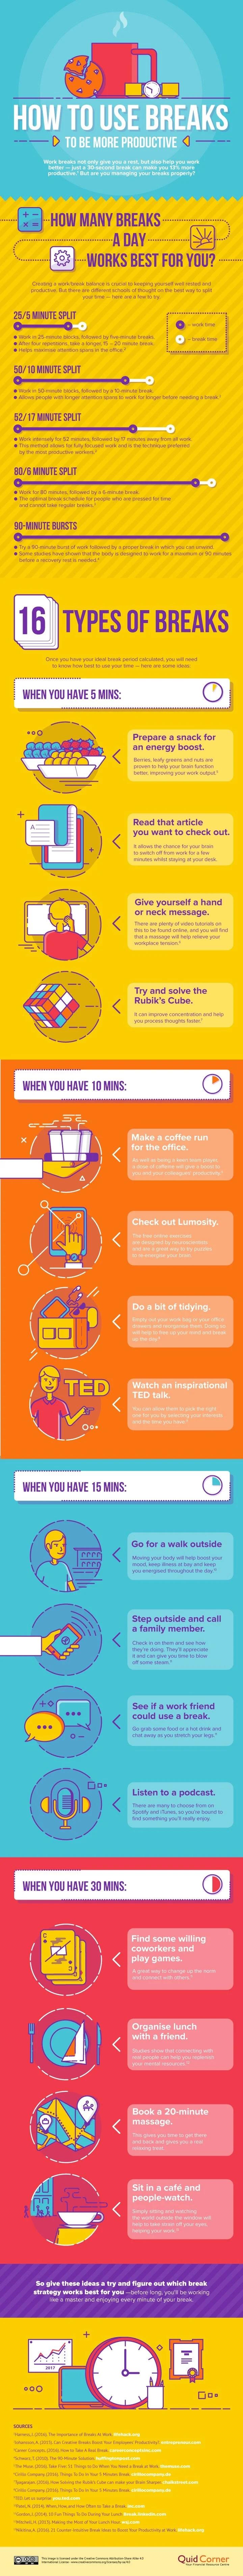 The Best Ways to Use Breaks to Be More Productive - #Infographic